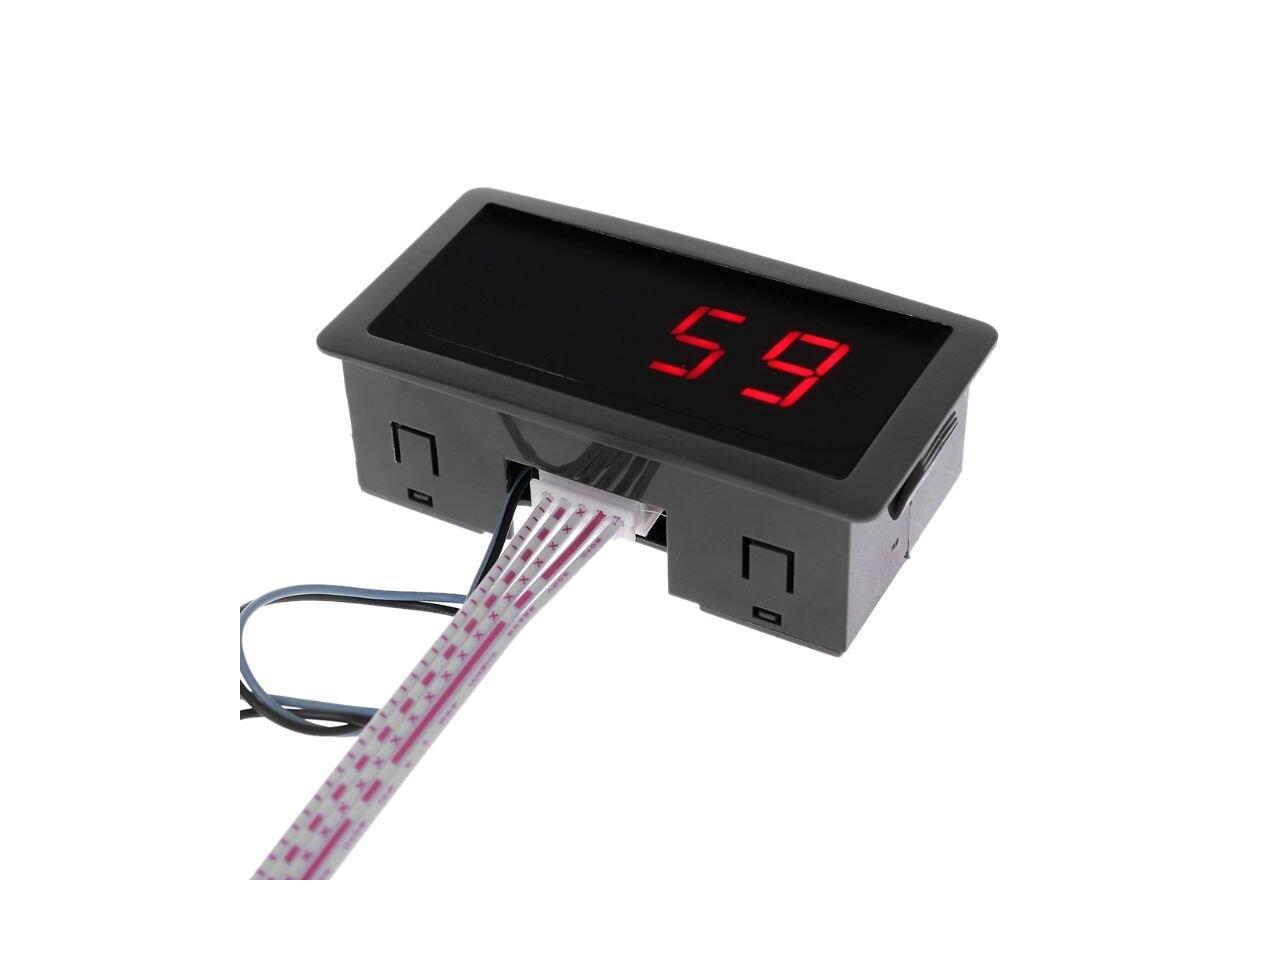 WolfGo Counter Meter DC LED Digital Display 4 Digit 0-9999 Up//Down Plus//Minus Panel Counter Meter with Cable